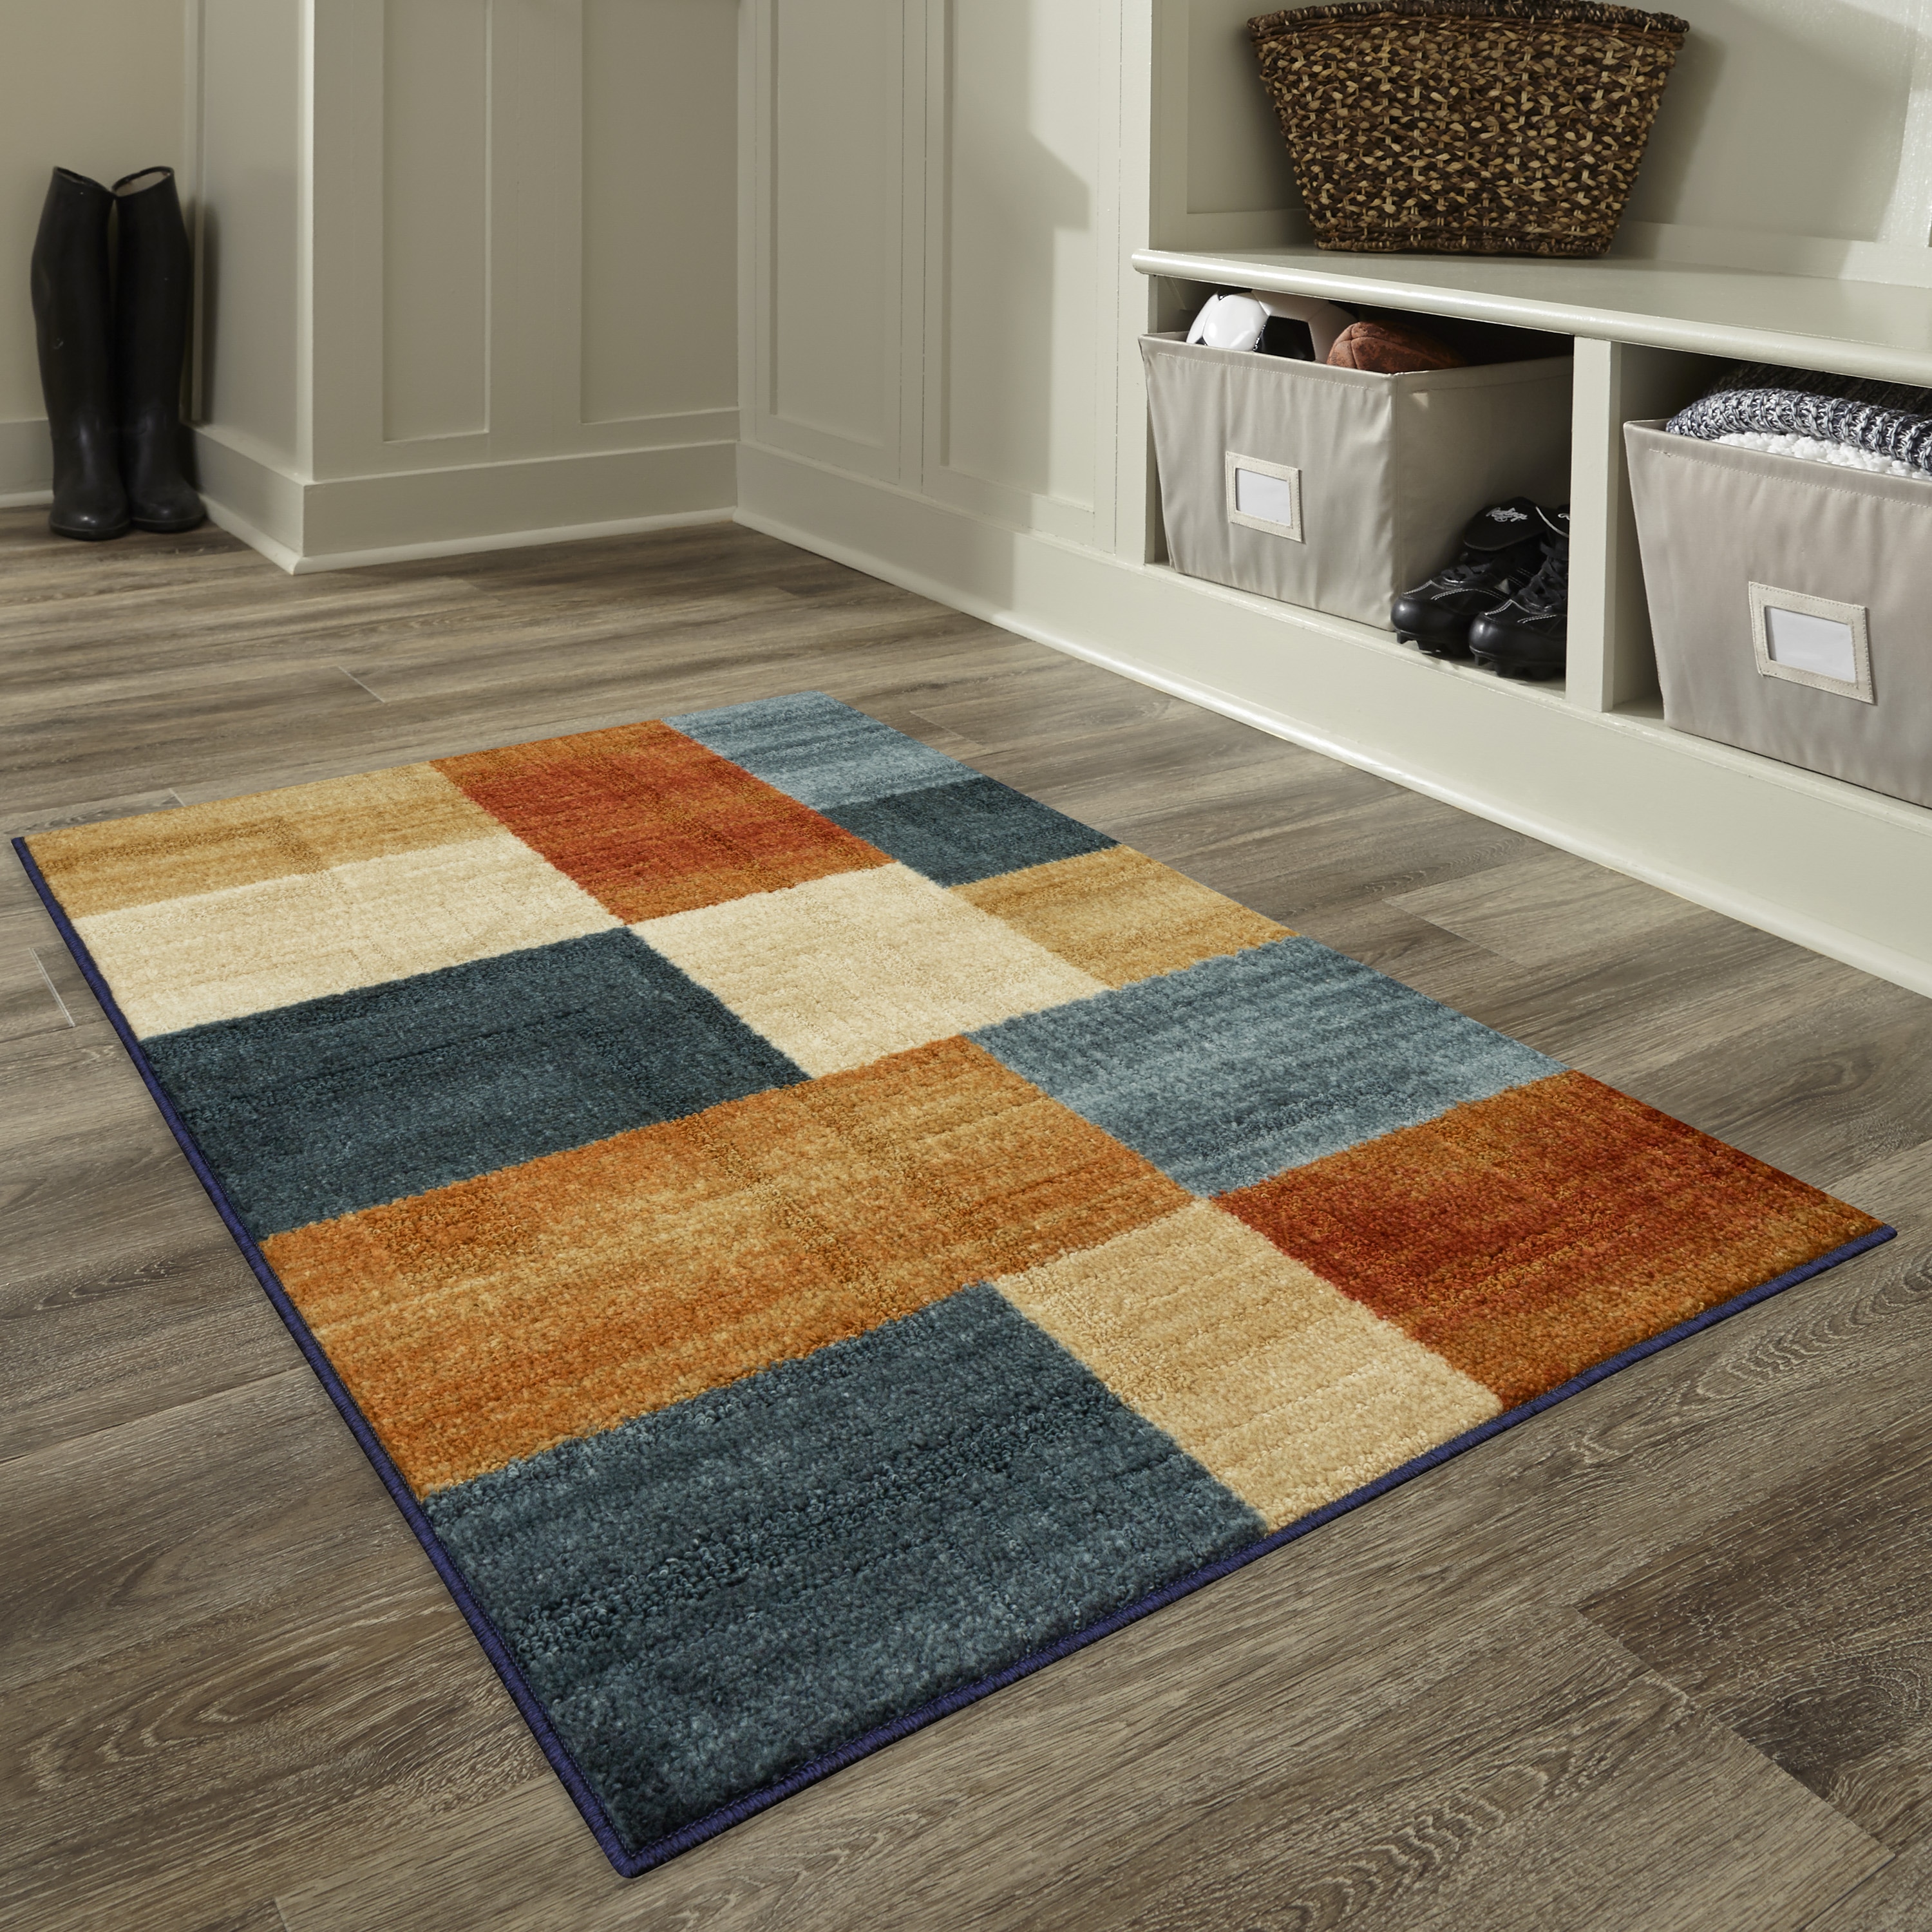 Durable Area Rug With Carpet Stickers, Non-slip Anti-drill Rug Pad